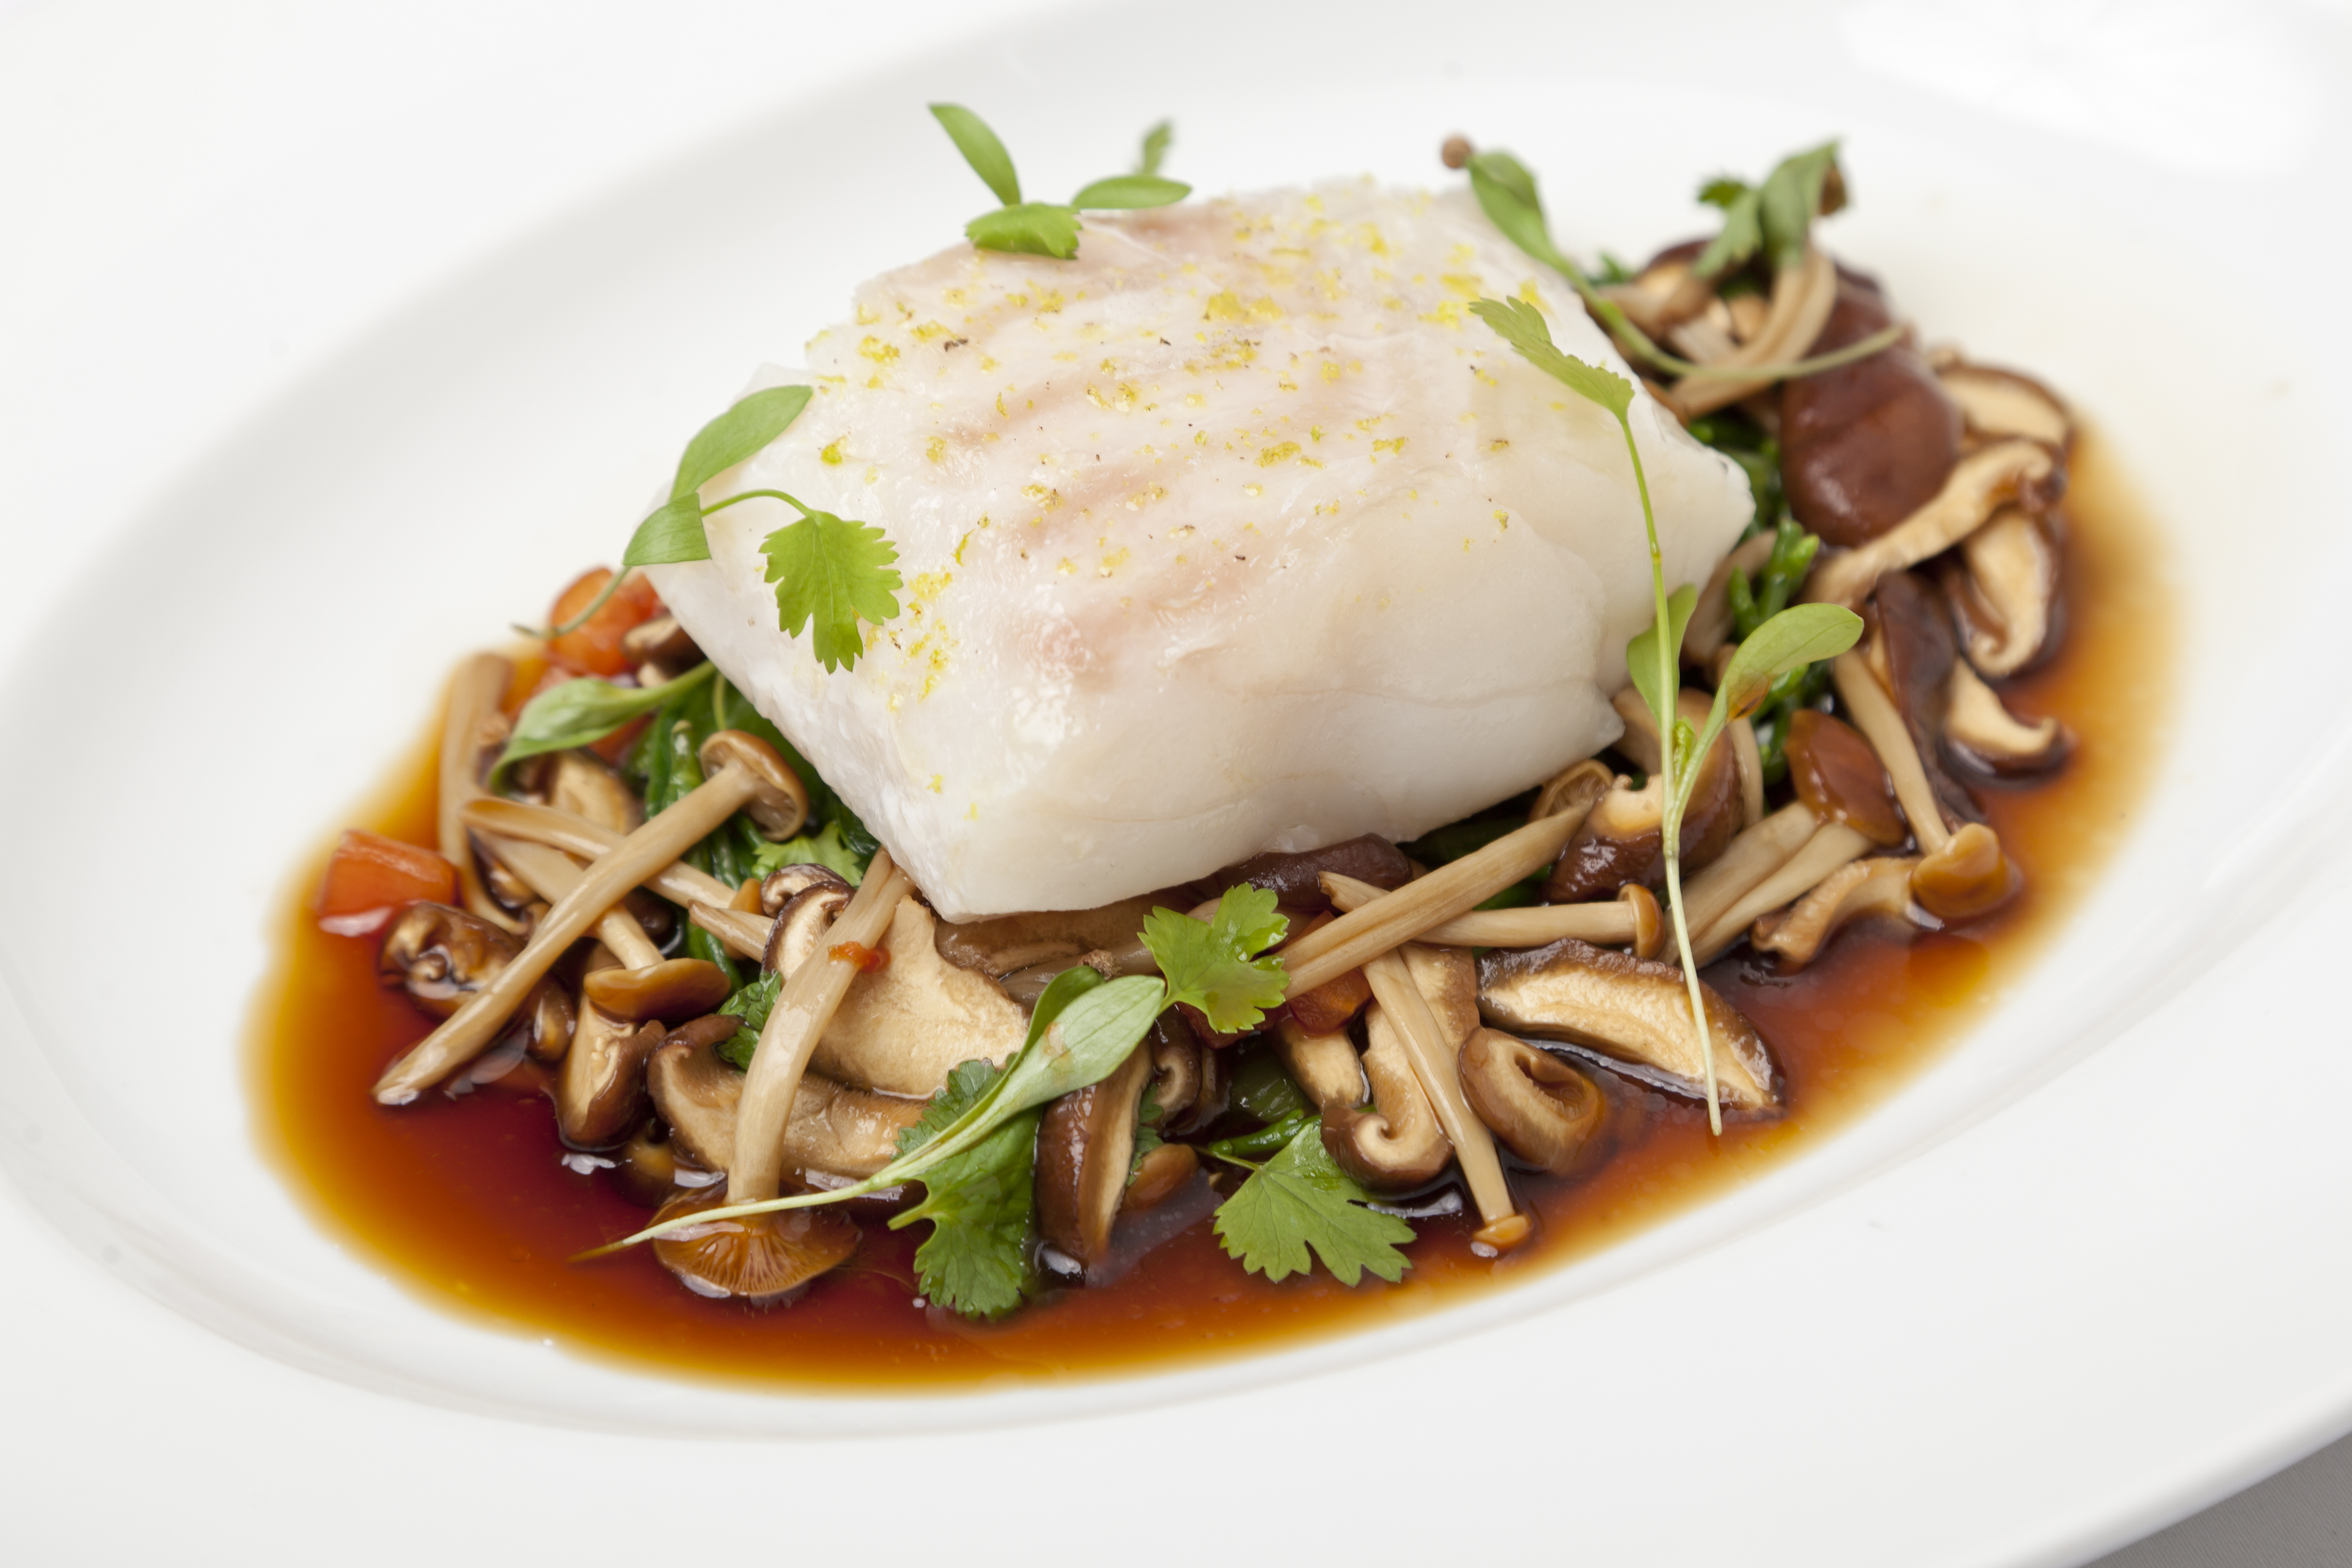 To Cod Sous Vide - British Chefs